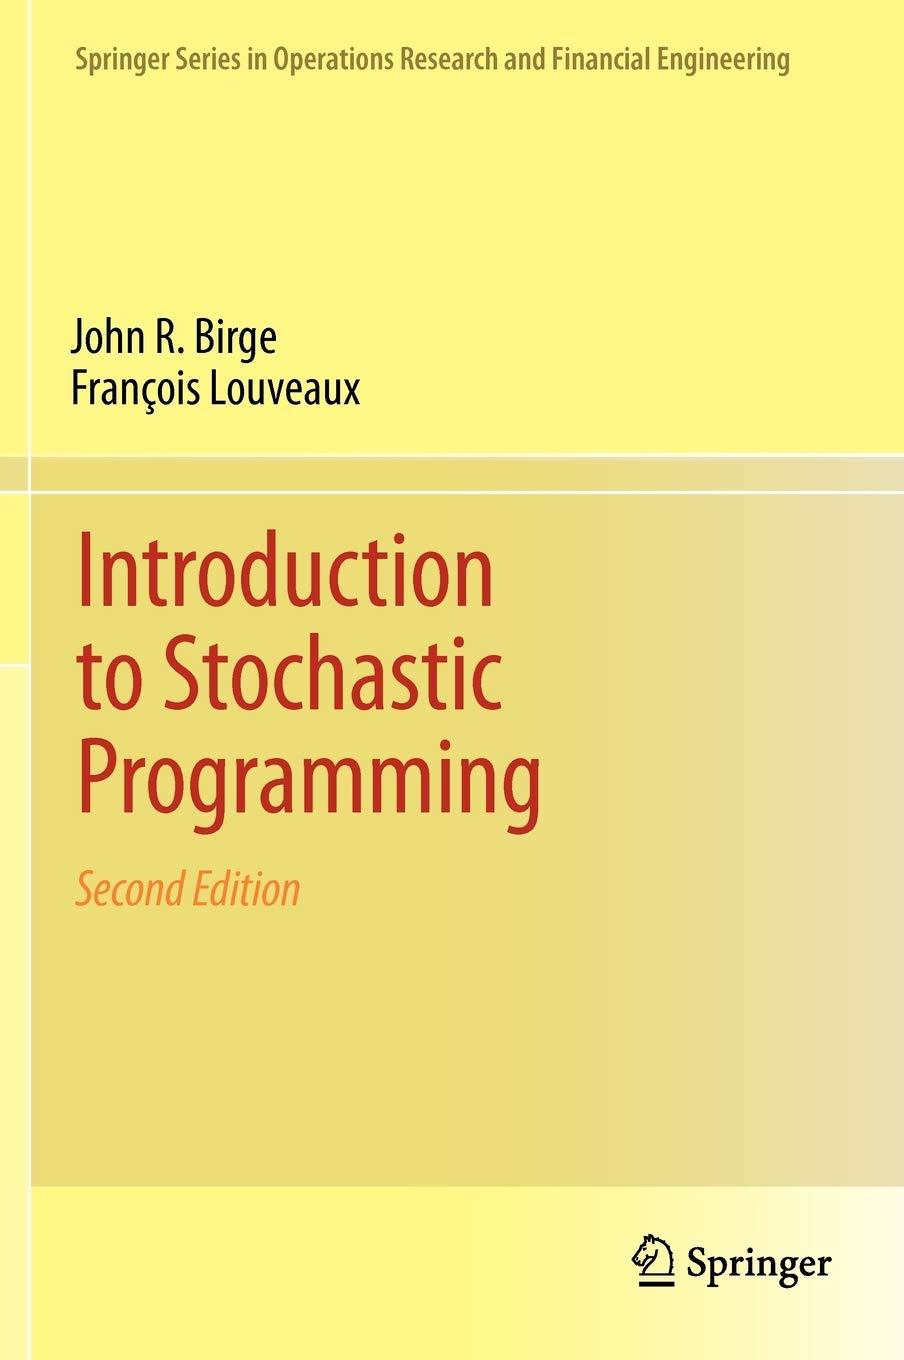 introduction to stochastic programming 2nd edition john r. birge, françois louveaux 1461402360,